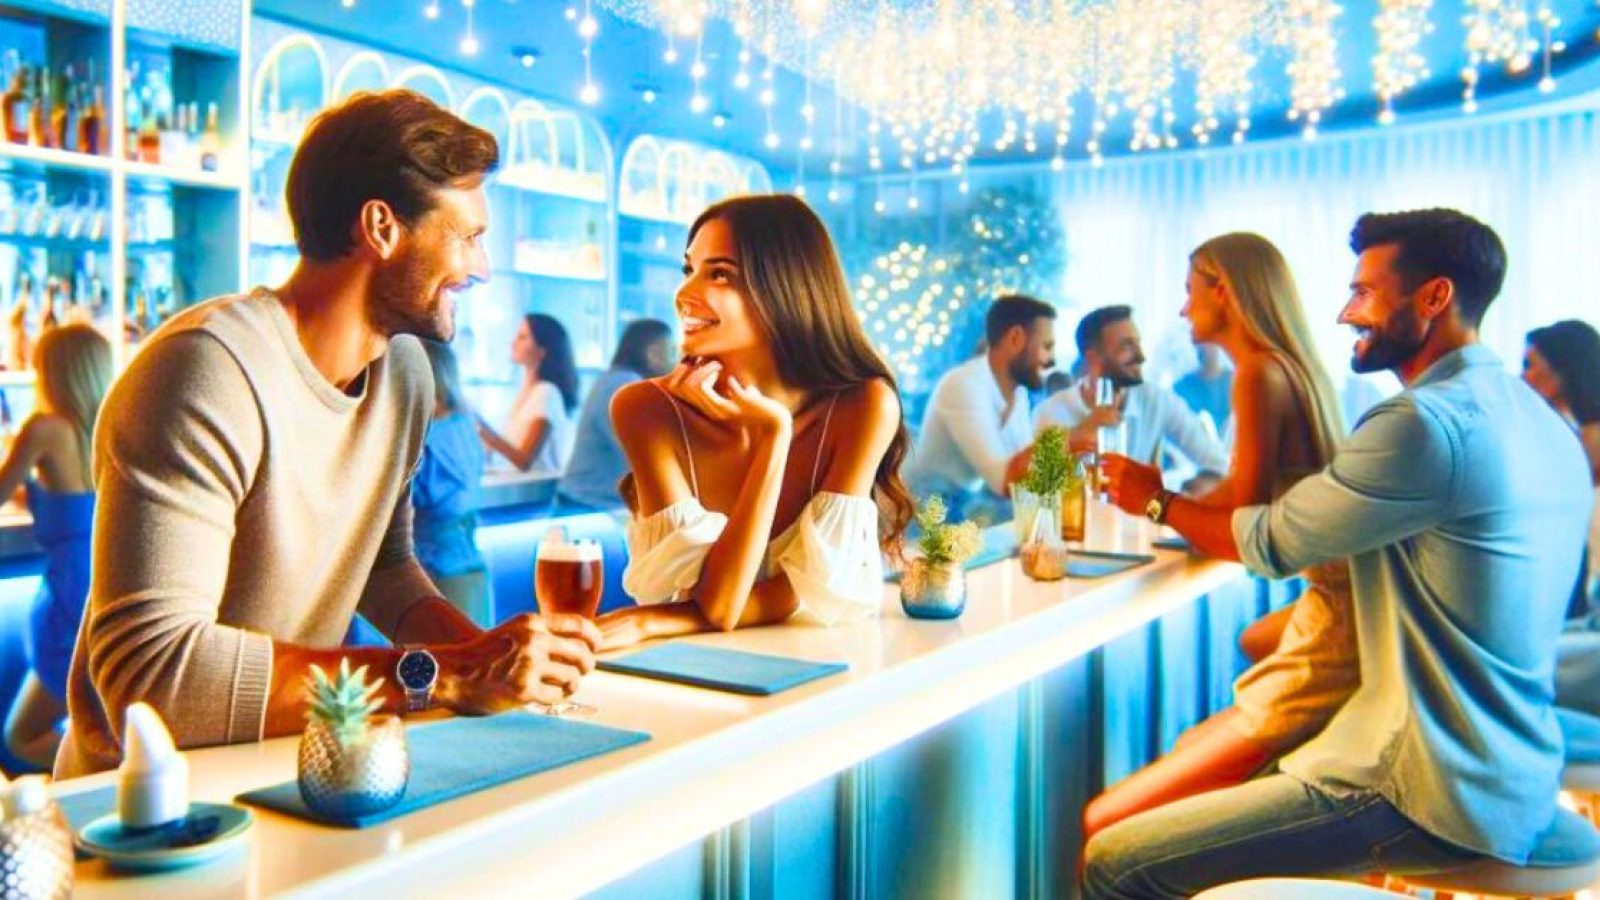 singles flirting at a speed dating event in a bar